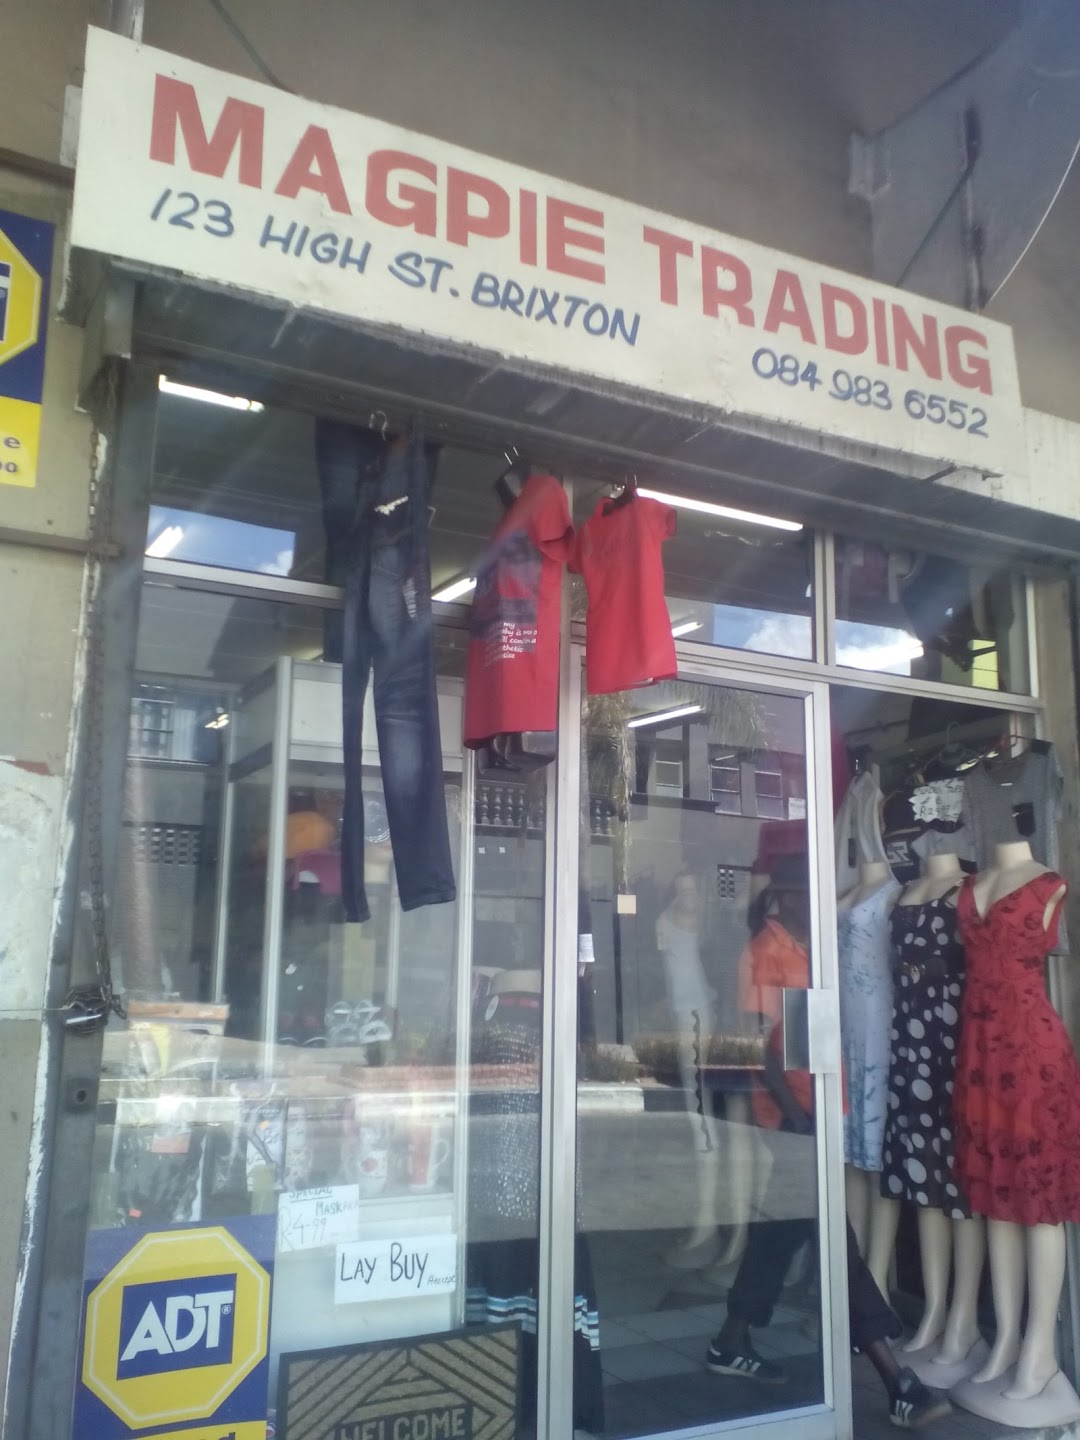 Magpie Trading